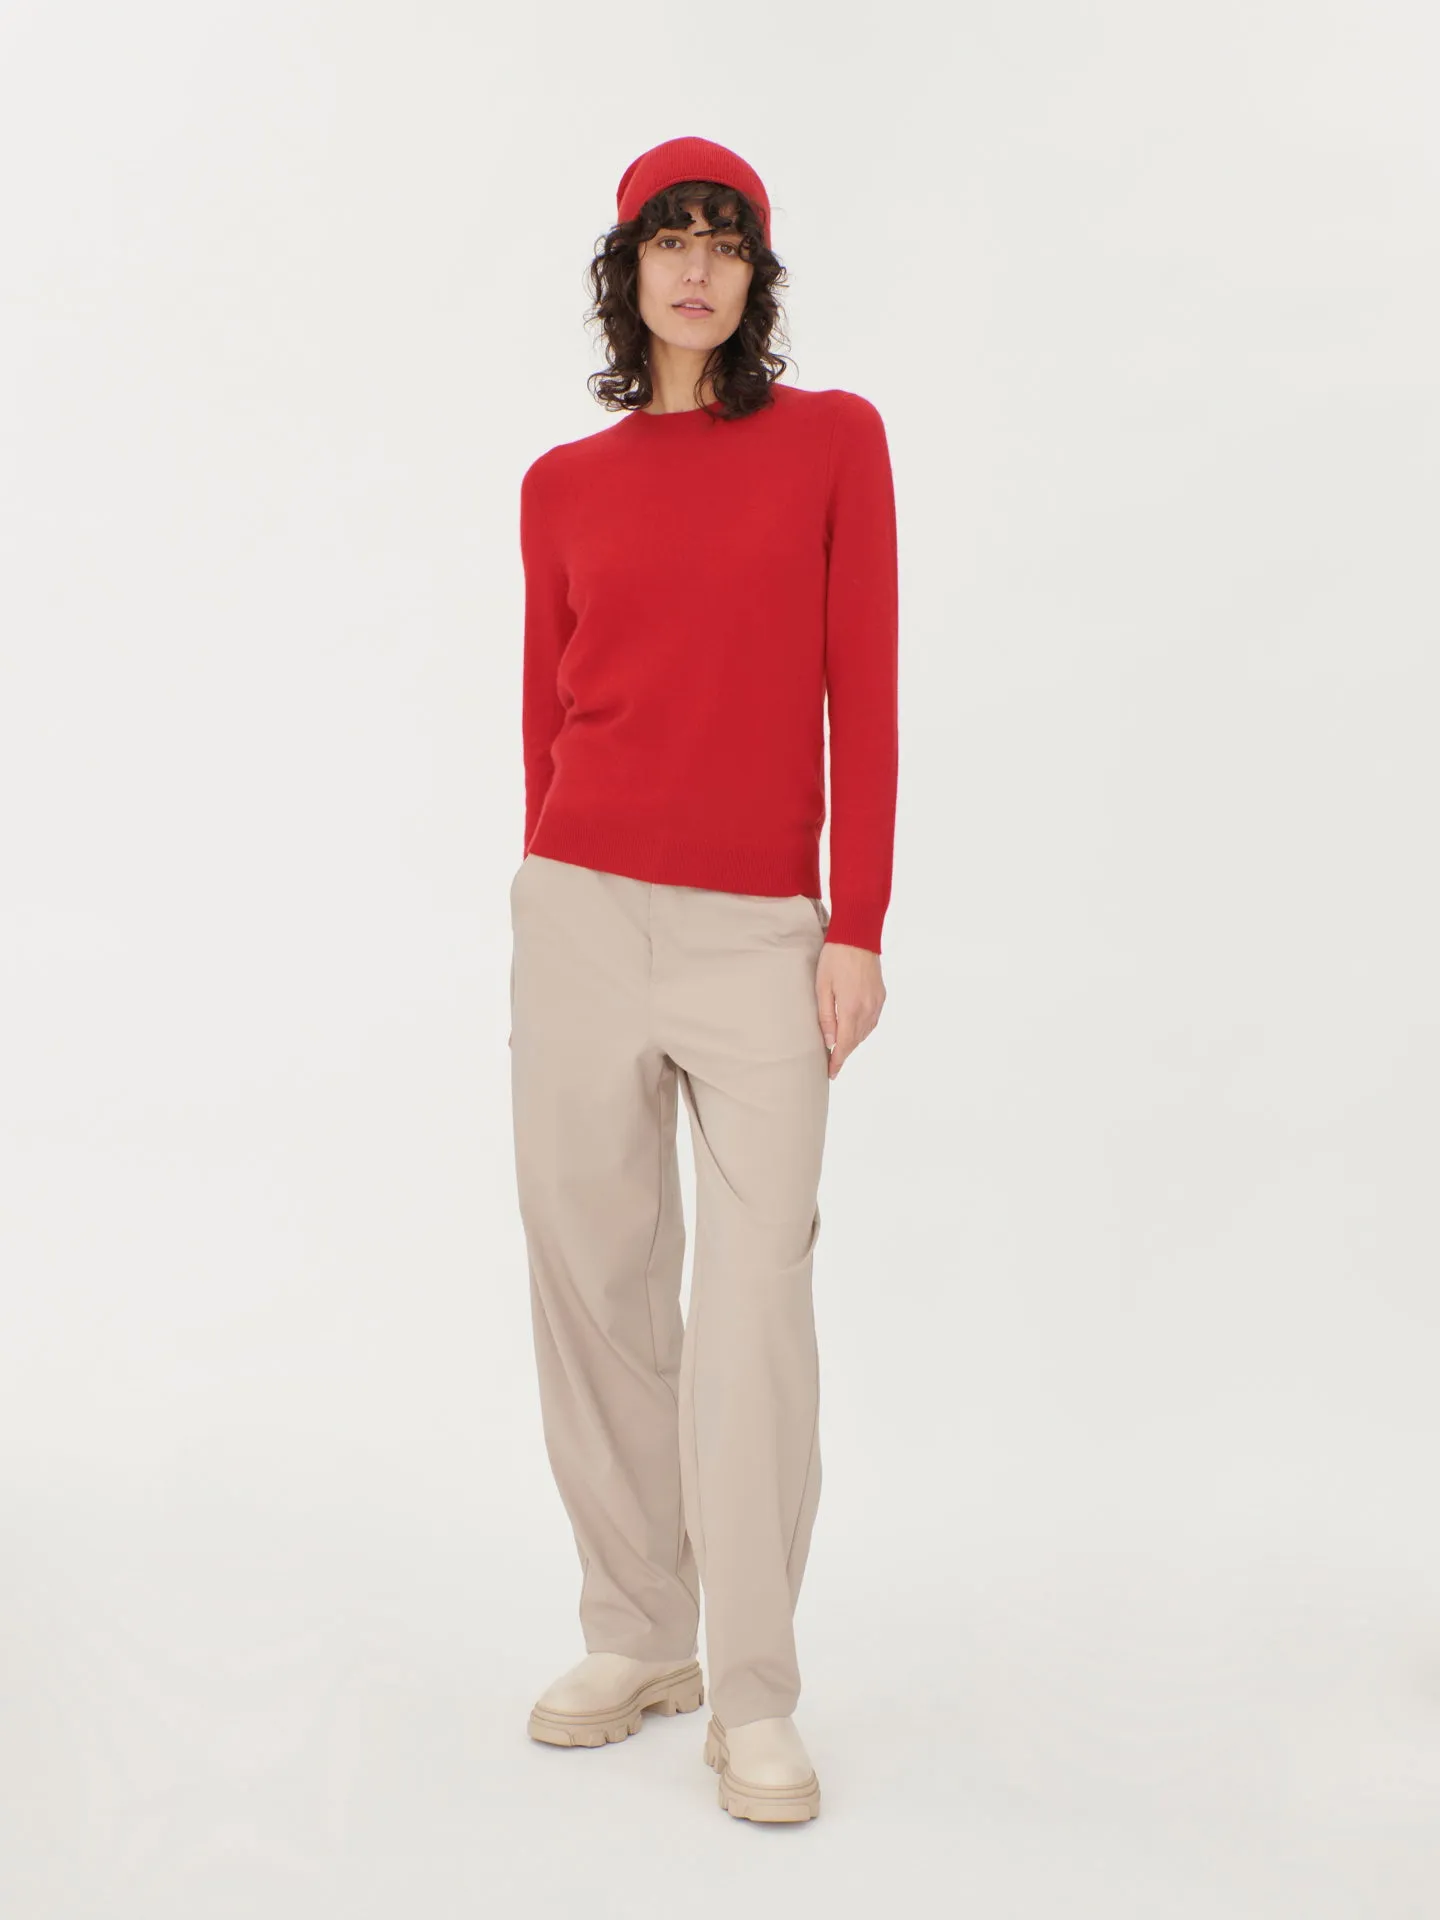 Women's Cashmere €99 Hat & Sweater Set Racing Red - Gobi Cashmere